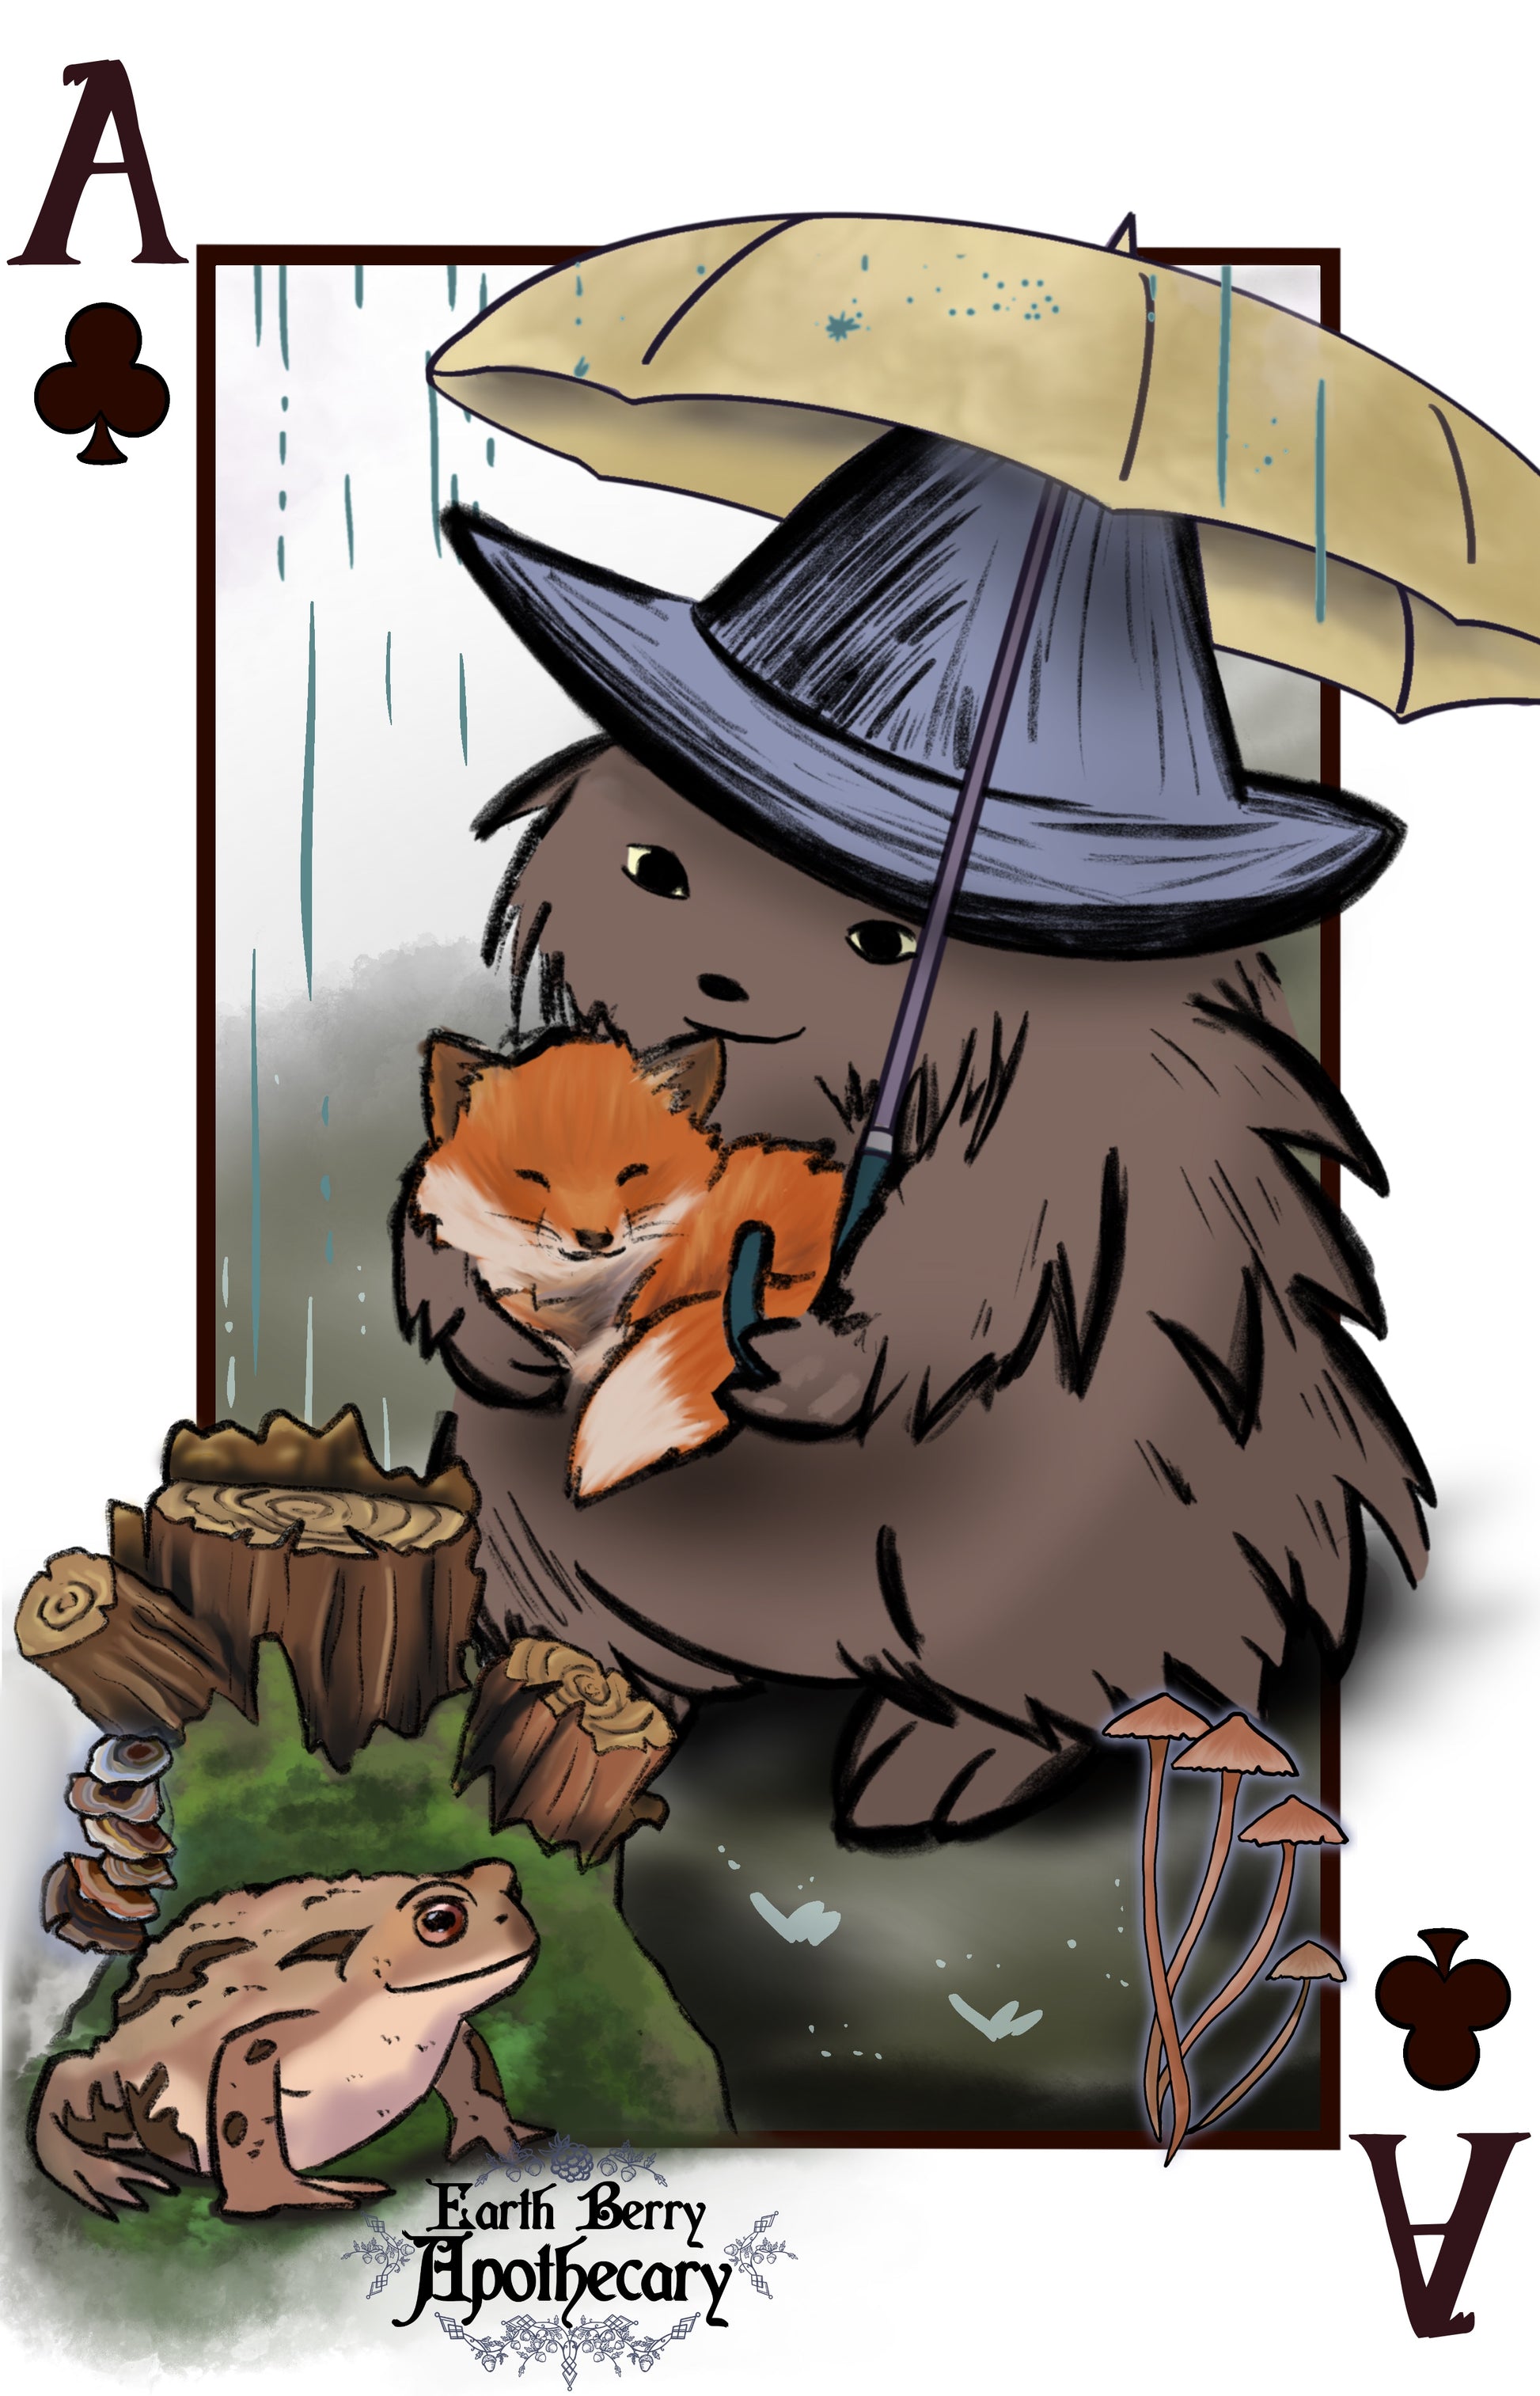 Fantasy themed playing cards. The ace of clubs playing card depicts the hedge witch hugging a baby fox. She holds an umbrella. A toad happily sits on a mossy stump in the rain.